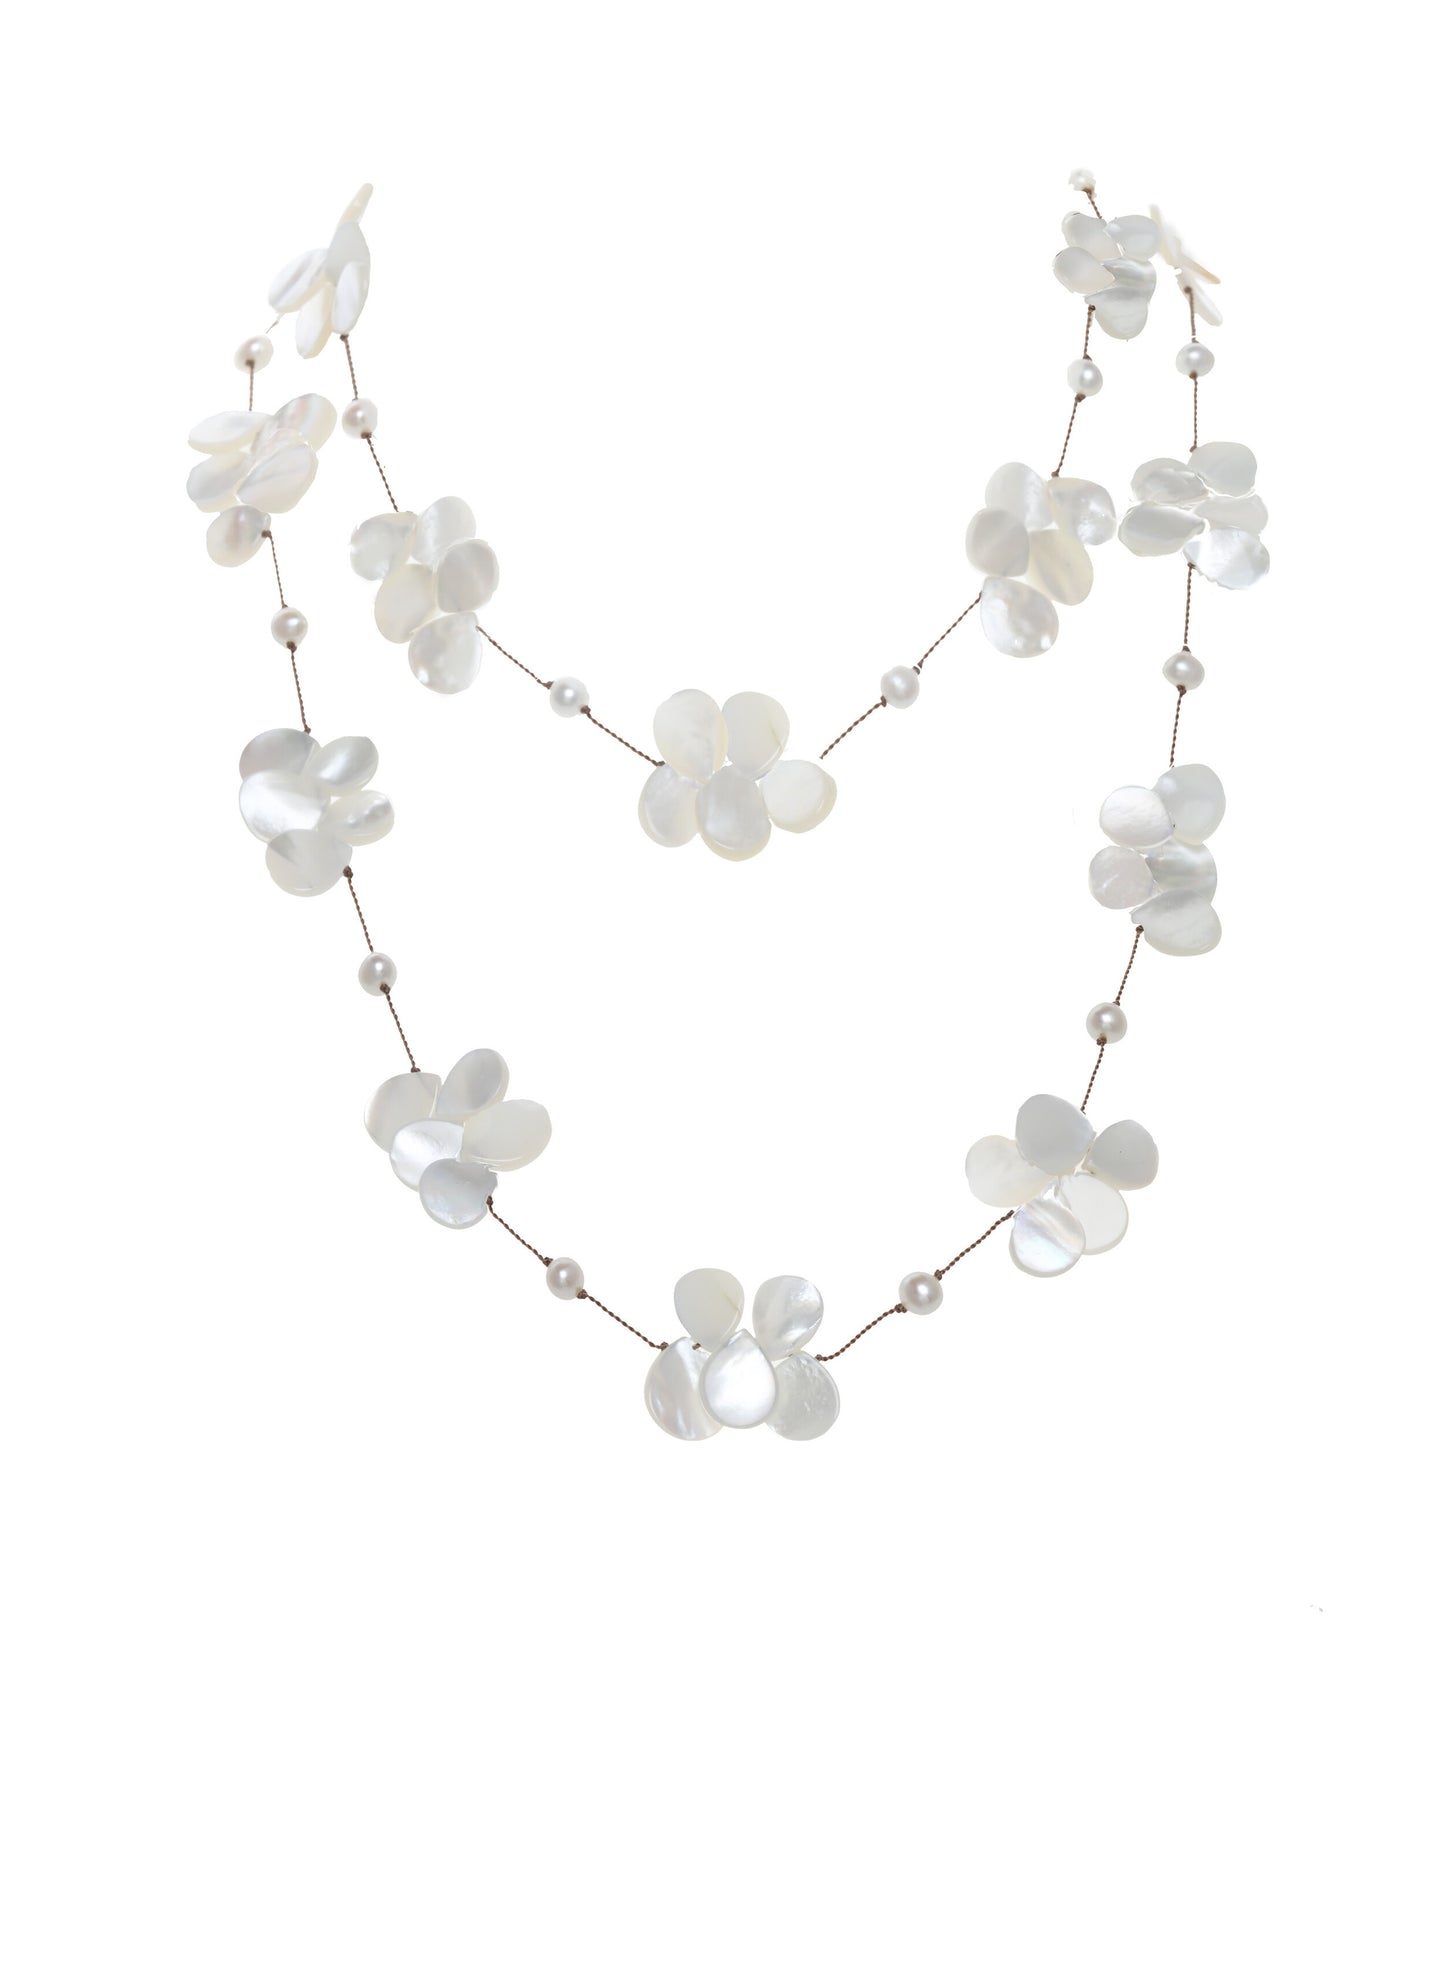 MOTHER OF PEARL FLUTTER NECKLACE, LN-1665